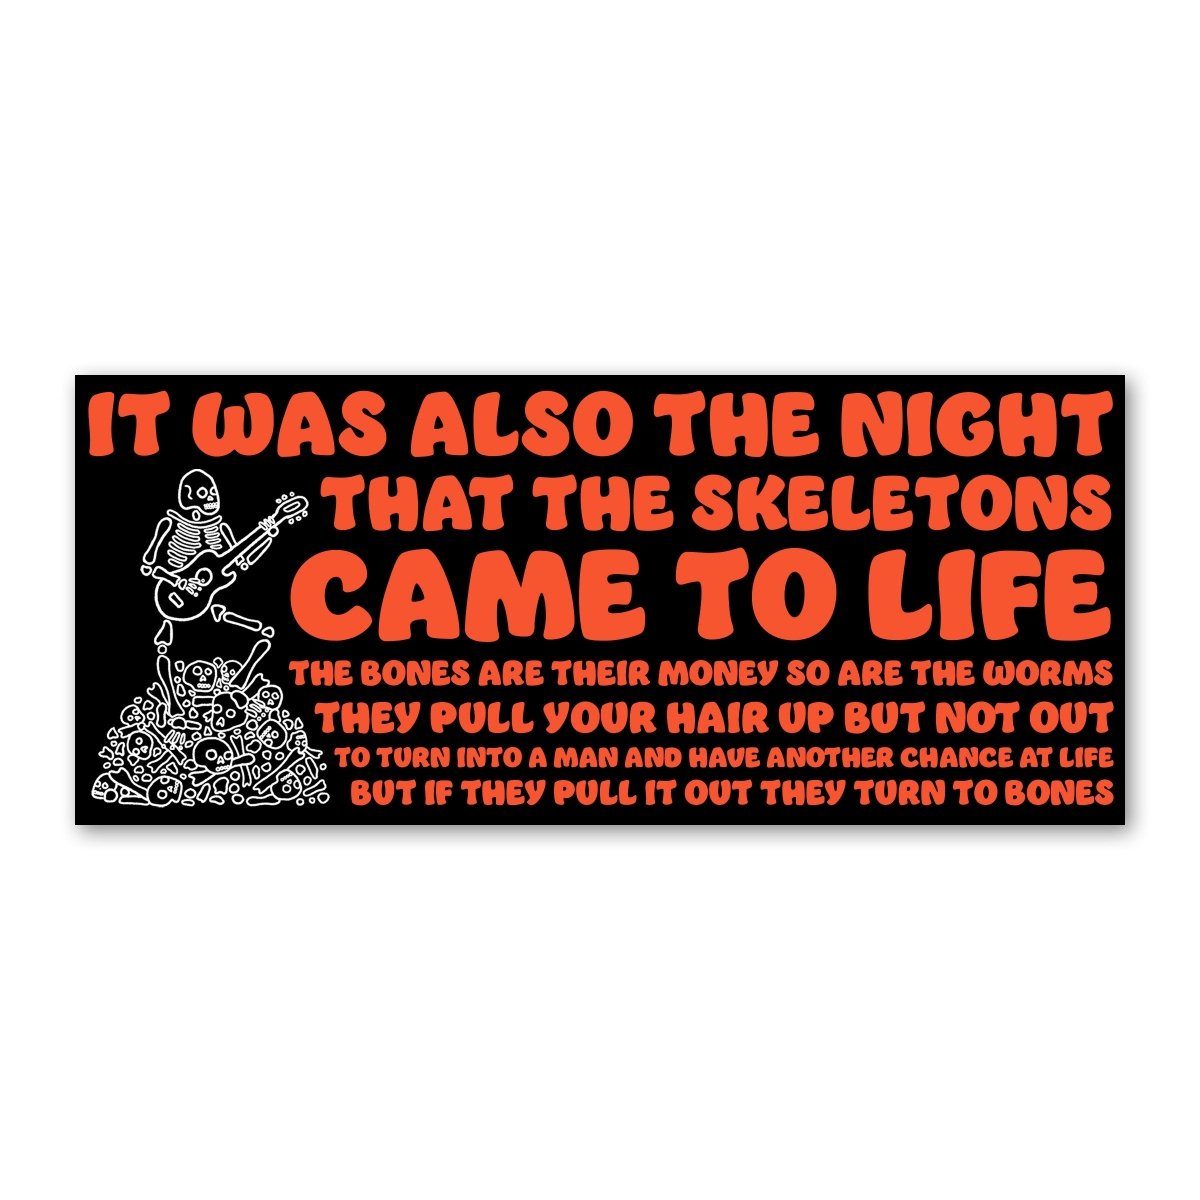 The night that the skeletons came to life bumper sticker. - Sticker - Pretty Bad Co.